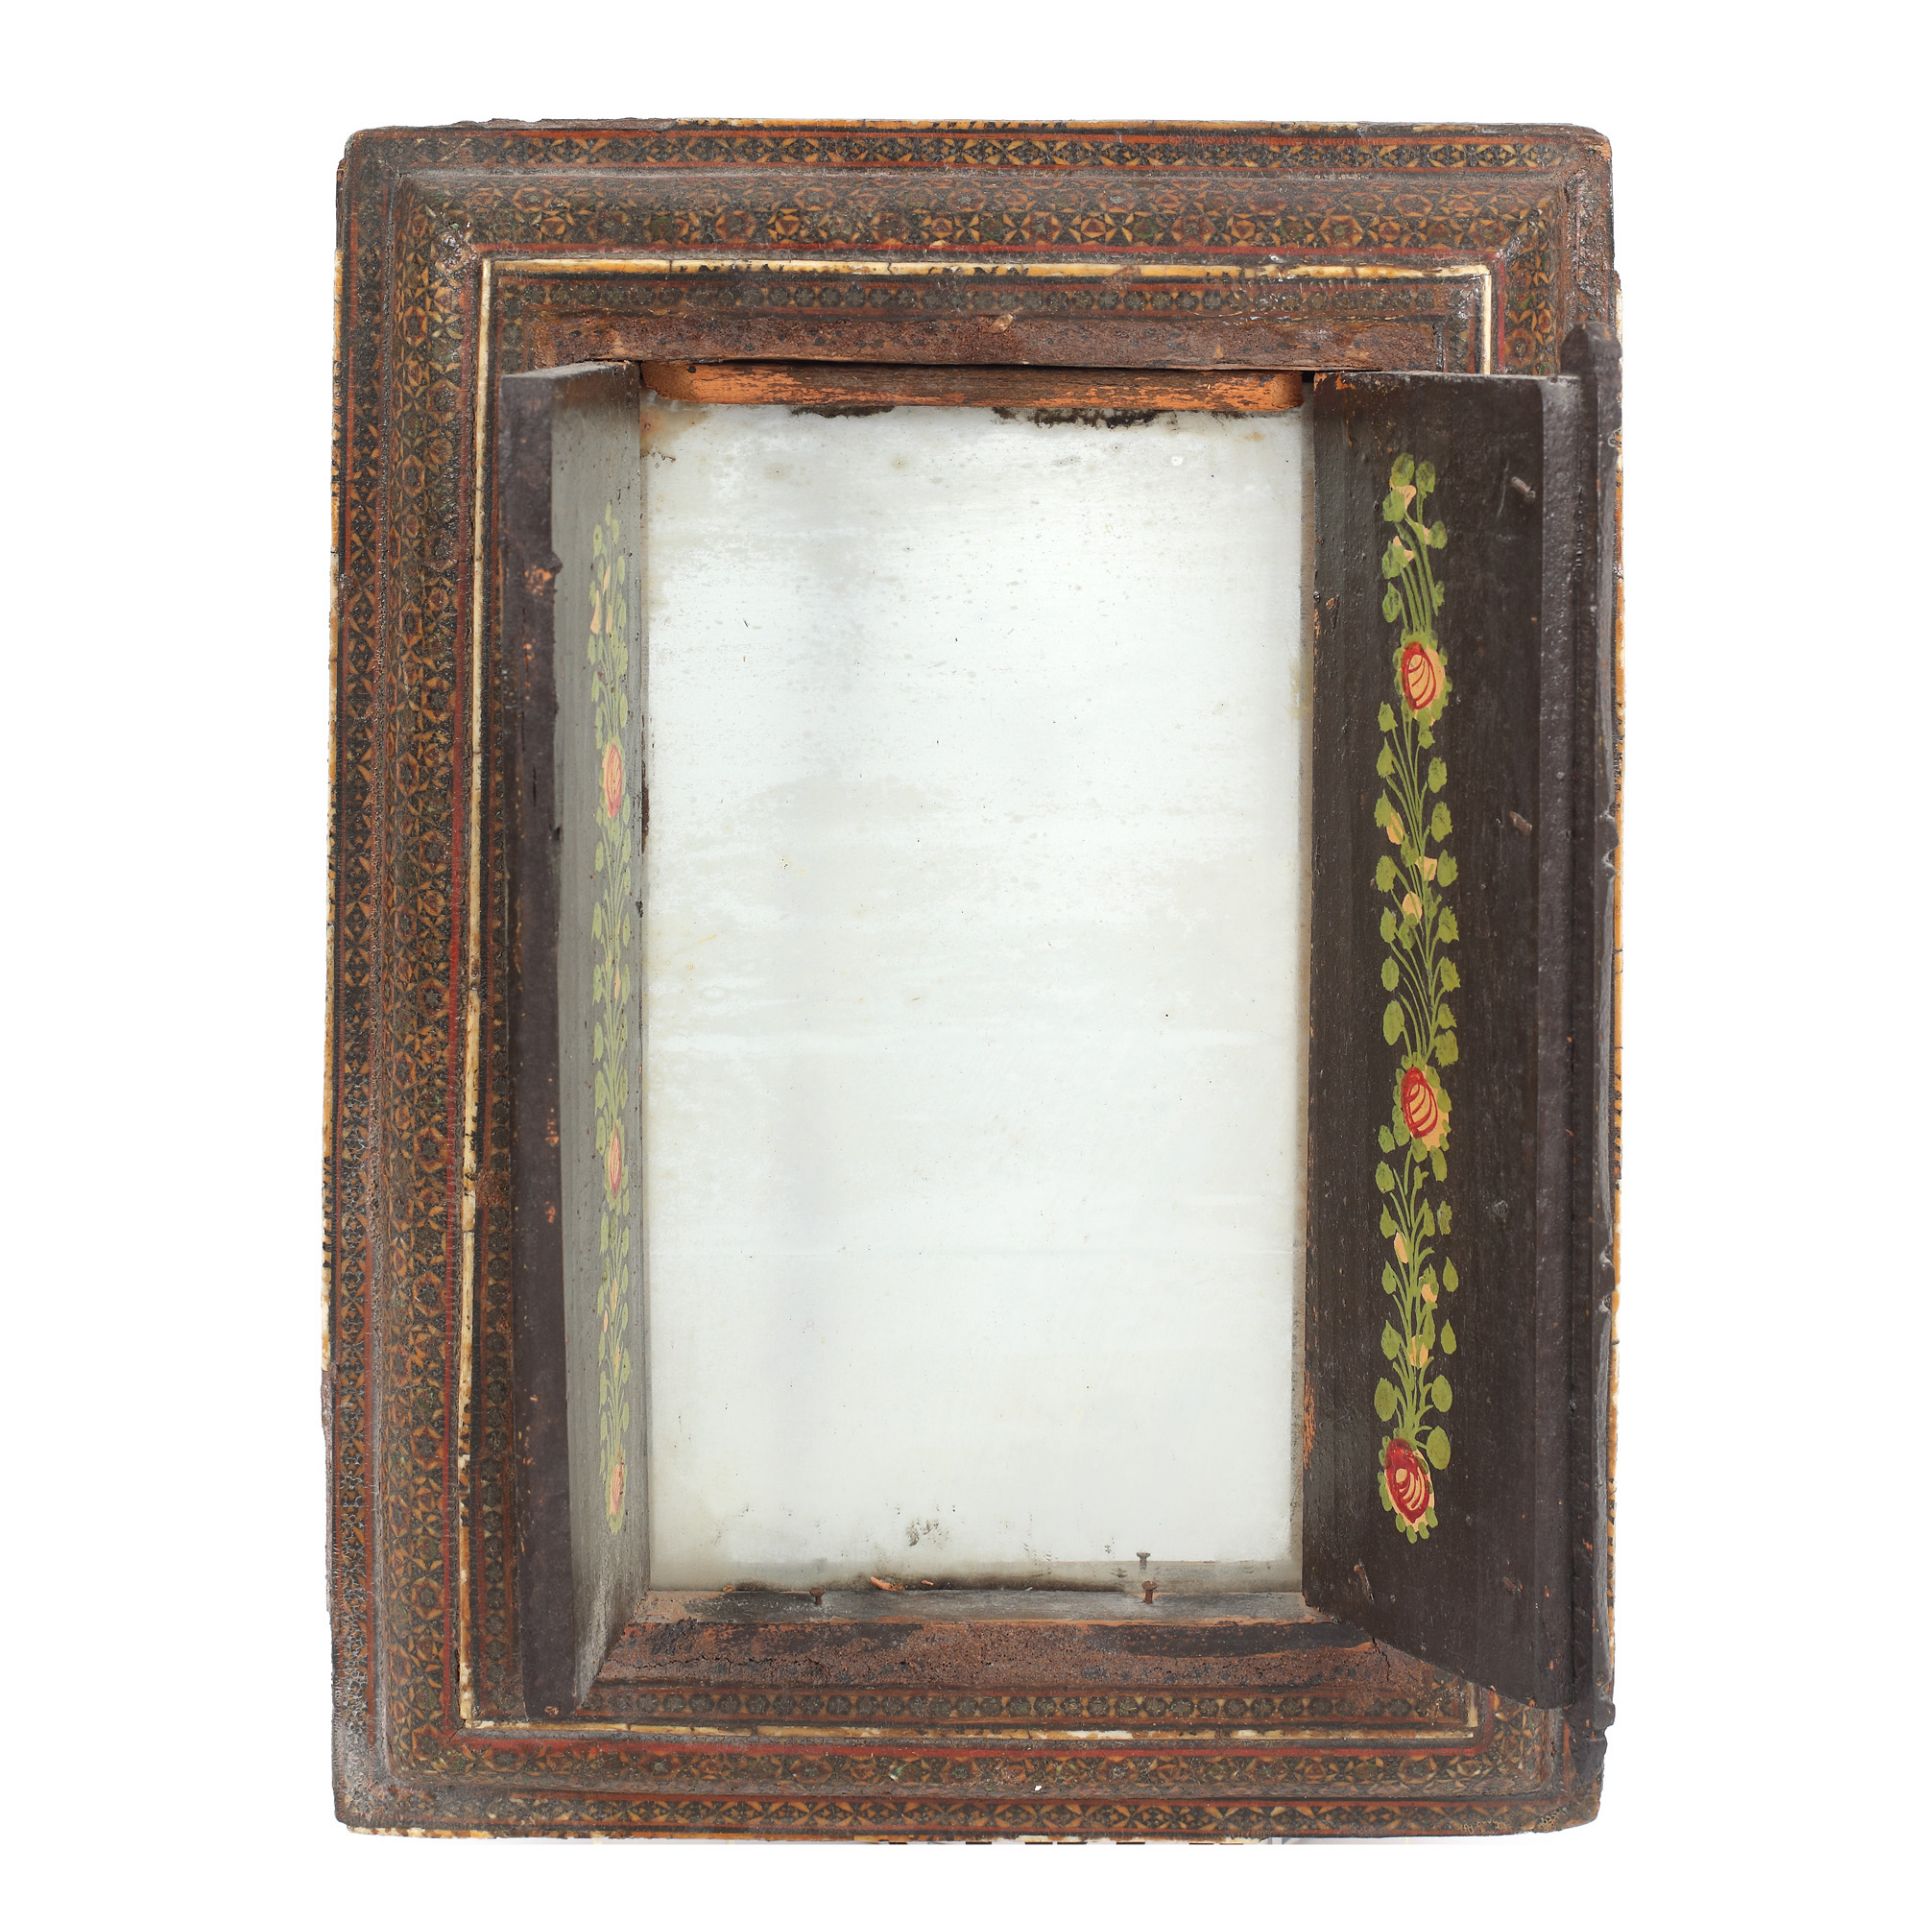 Carved and painted wooden mirror, decorated with traditional motifs, India, early 20th century - Image 2 of 2